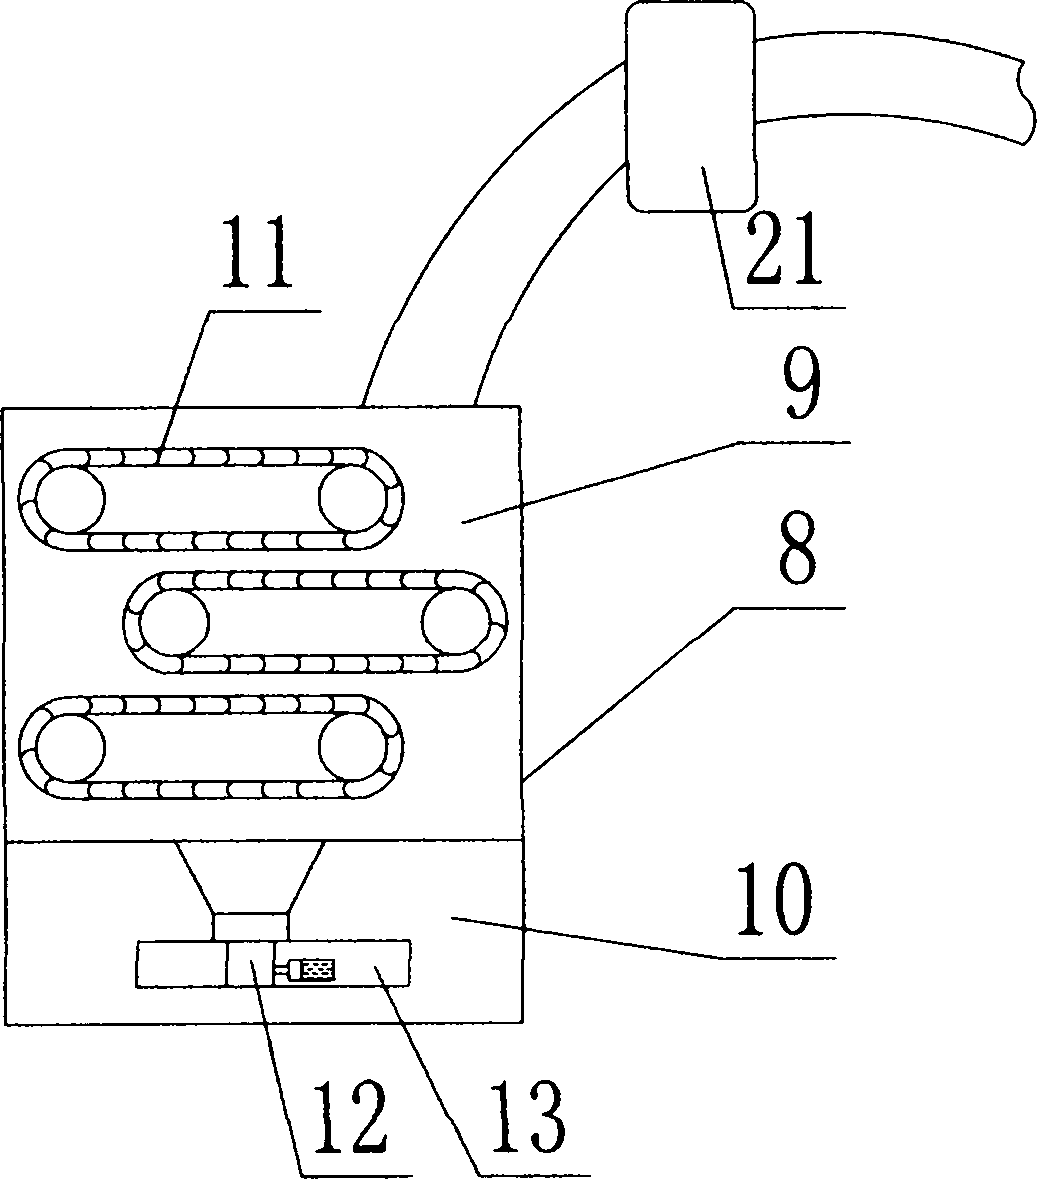 Device and process for removing red skin of peanuts by partitioned temperature control quick cooling at low temperature